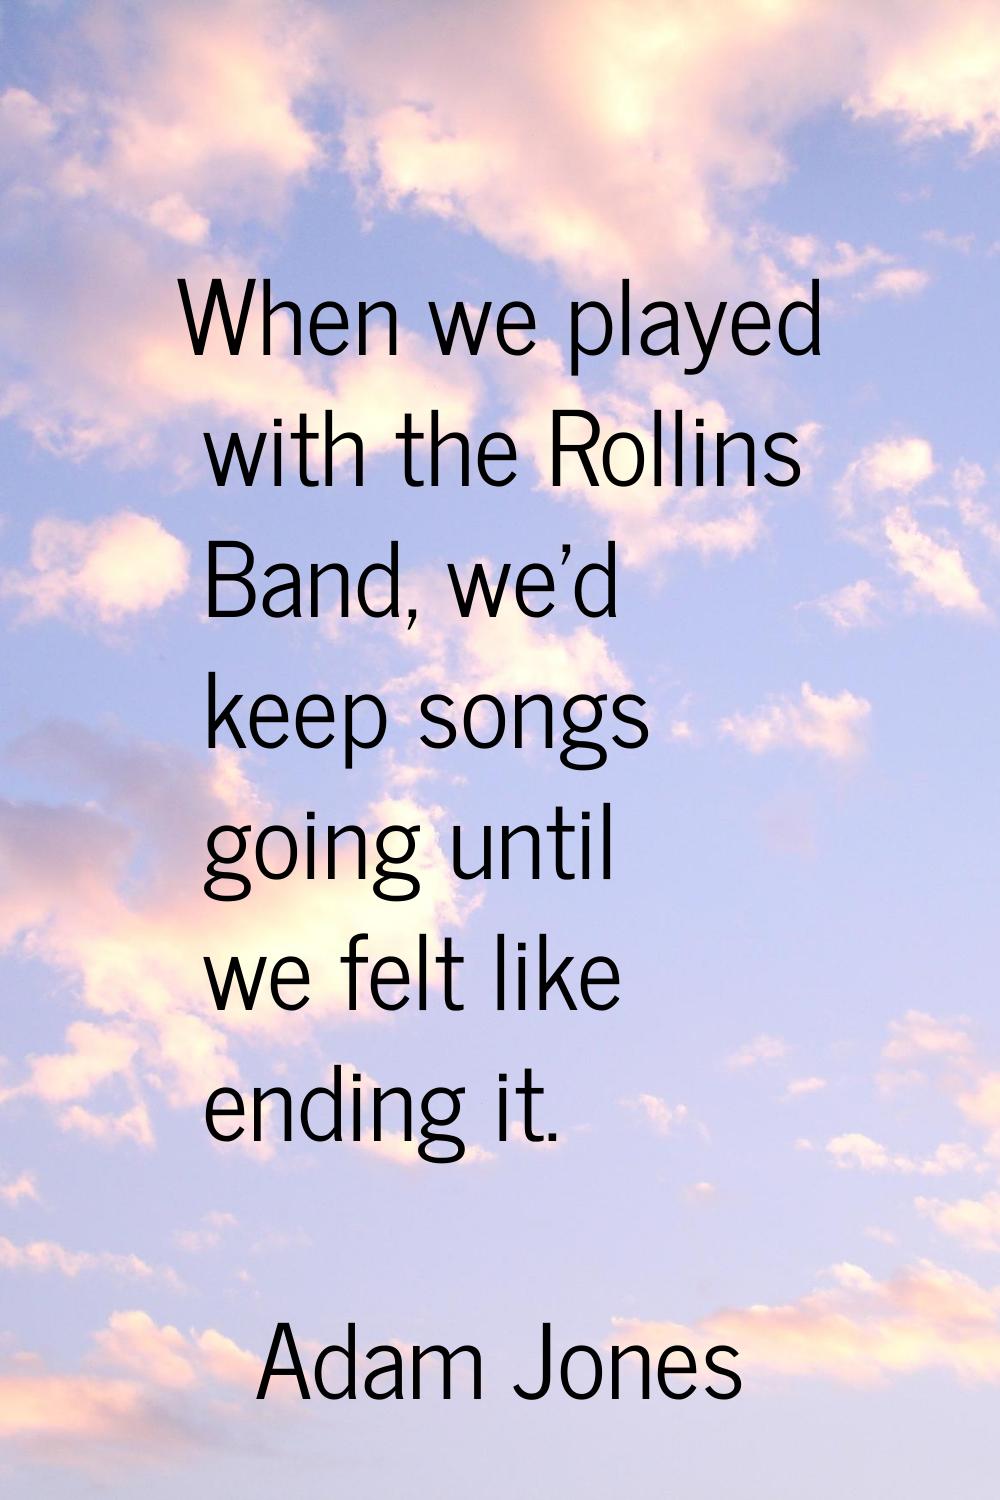 When we played with the Rollins Band, we'd keep songs going until we felt like ending it.